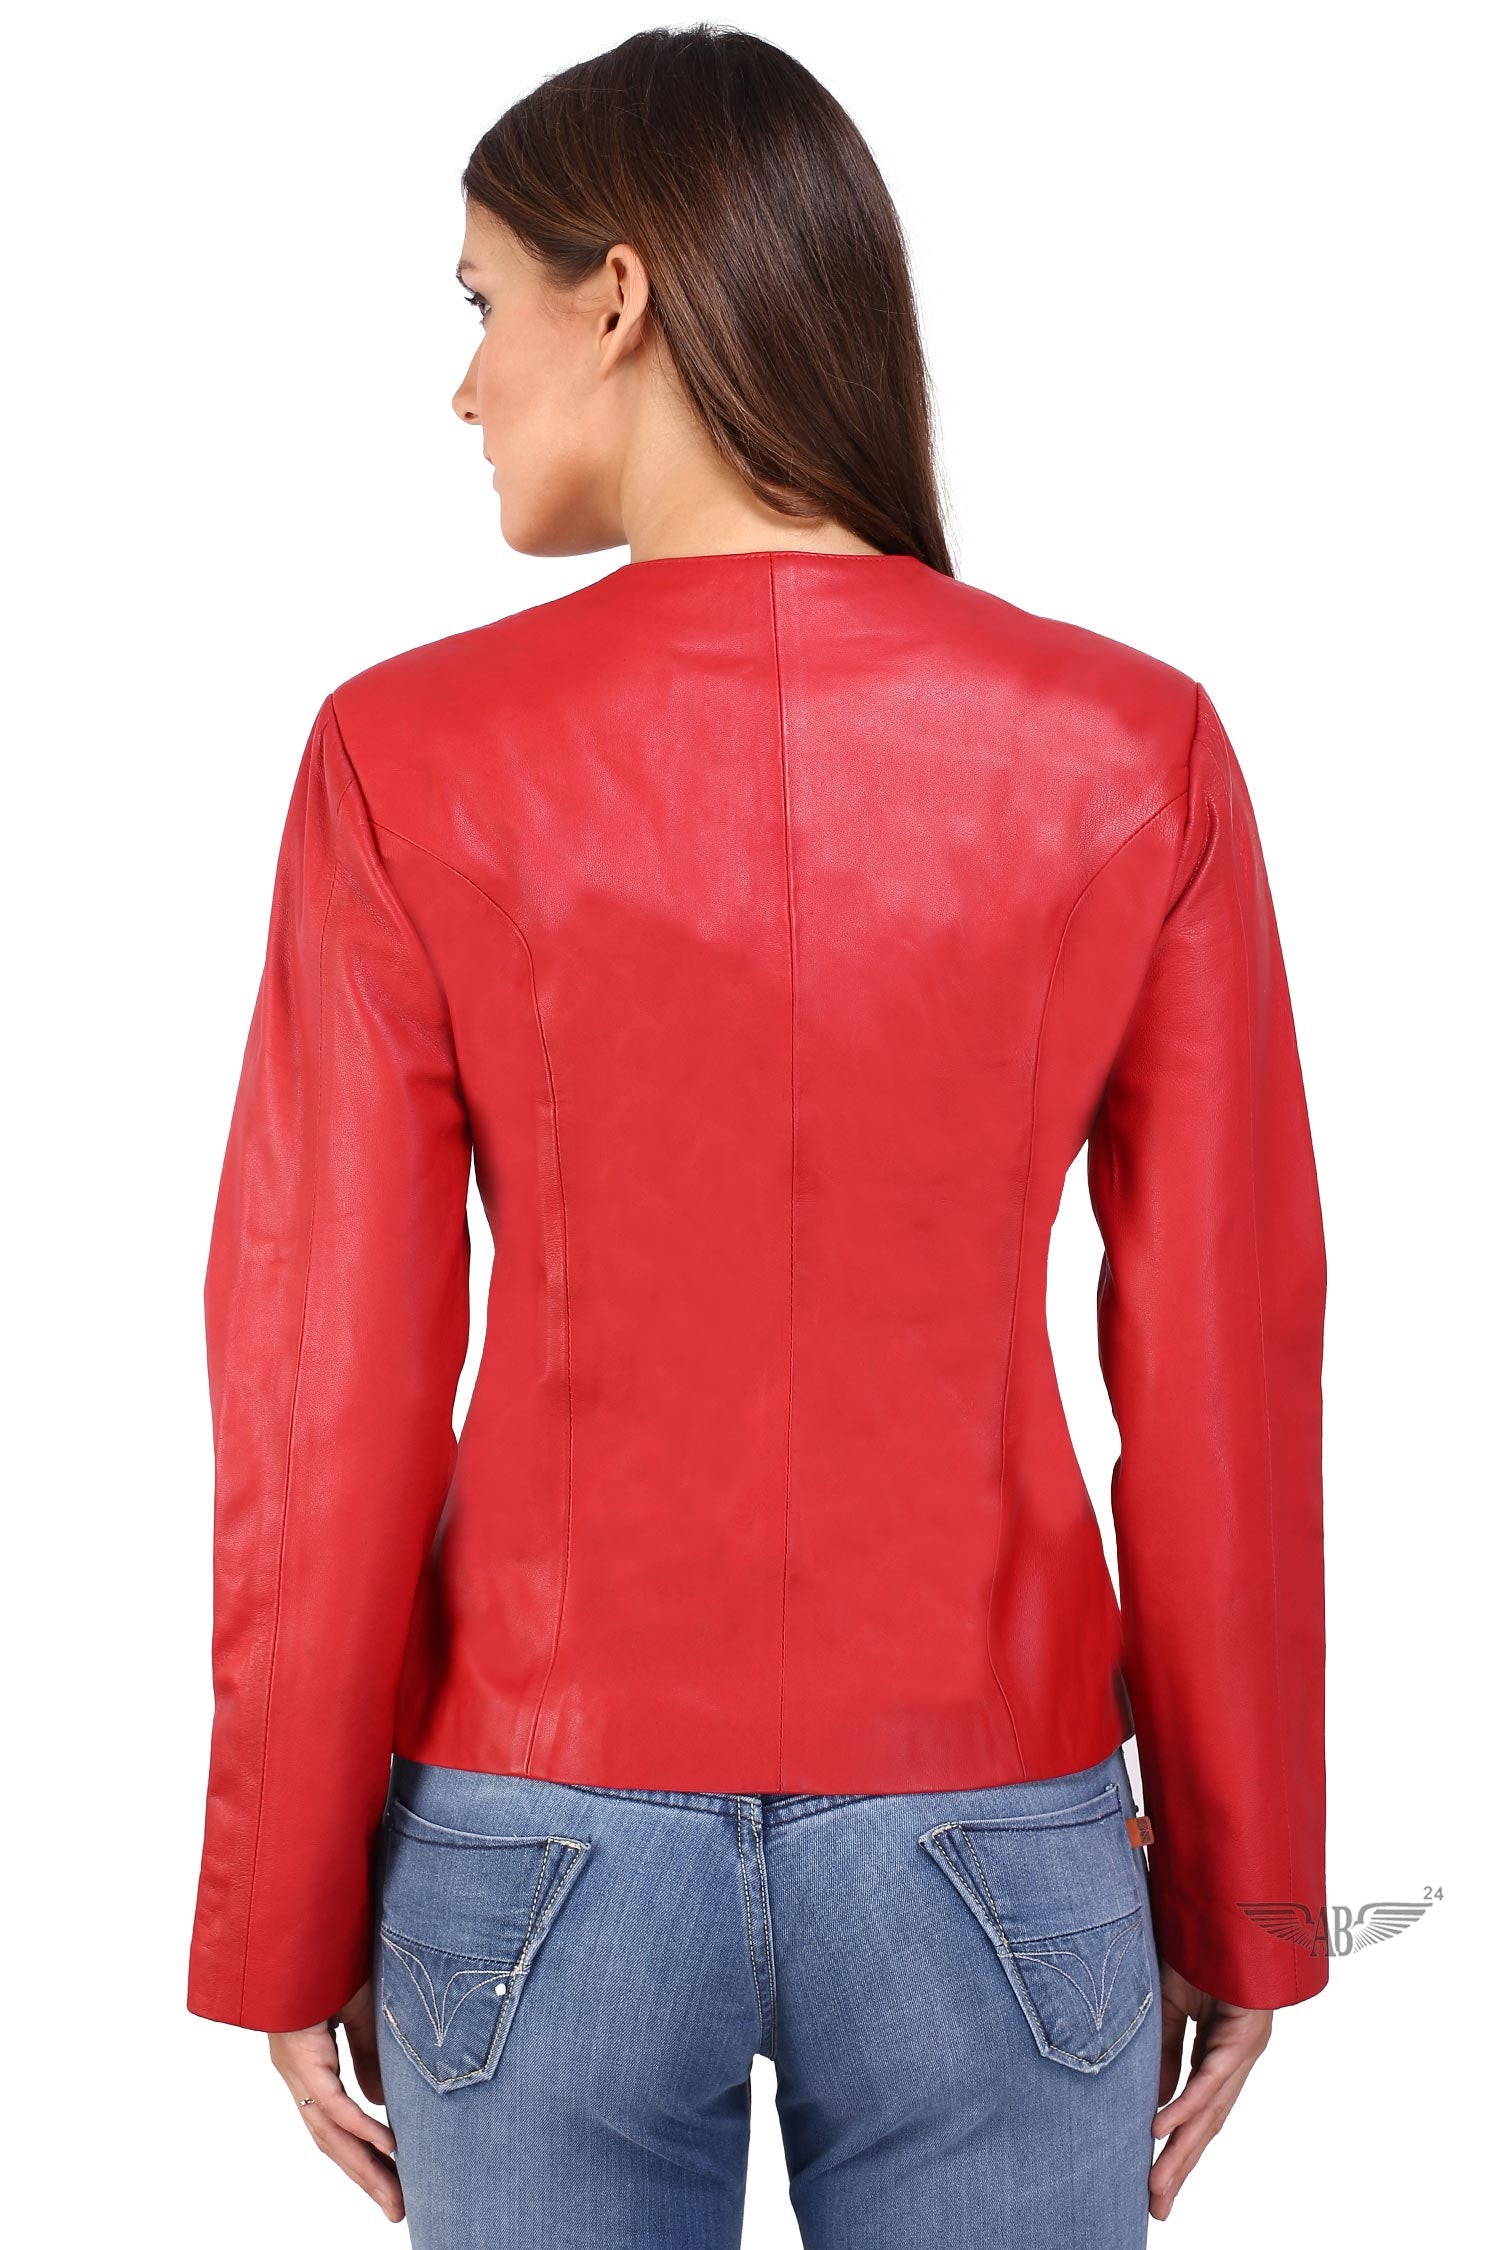 Back side image of red CLASSIC CHANNEL JACKET